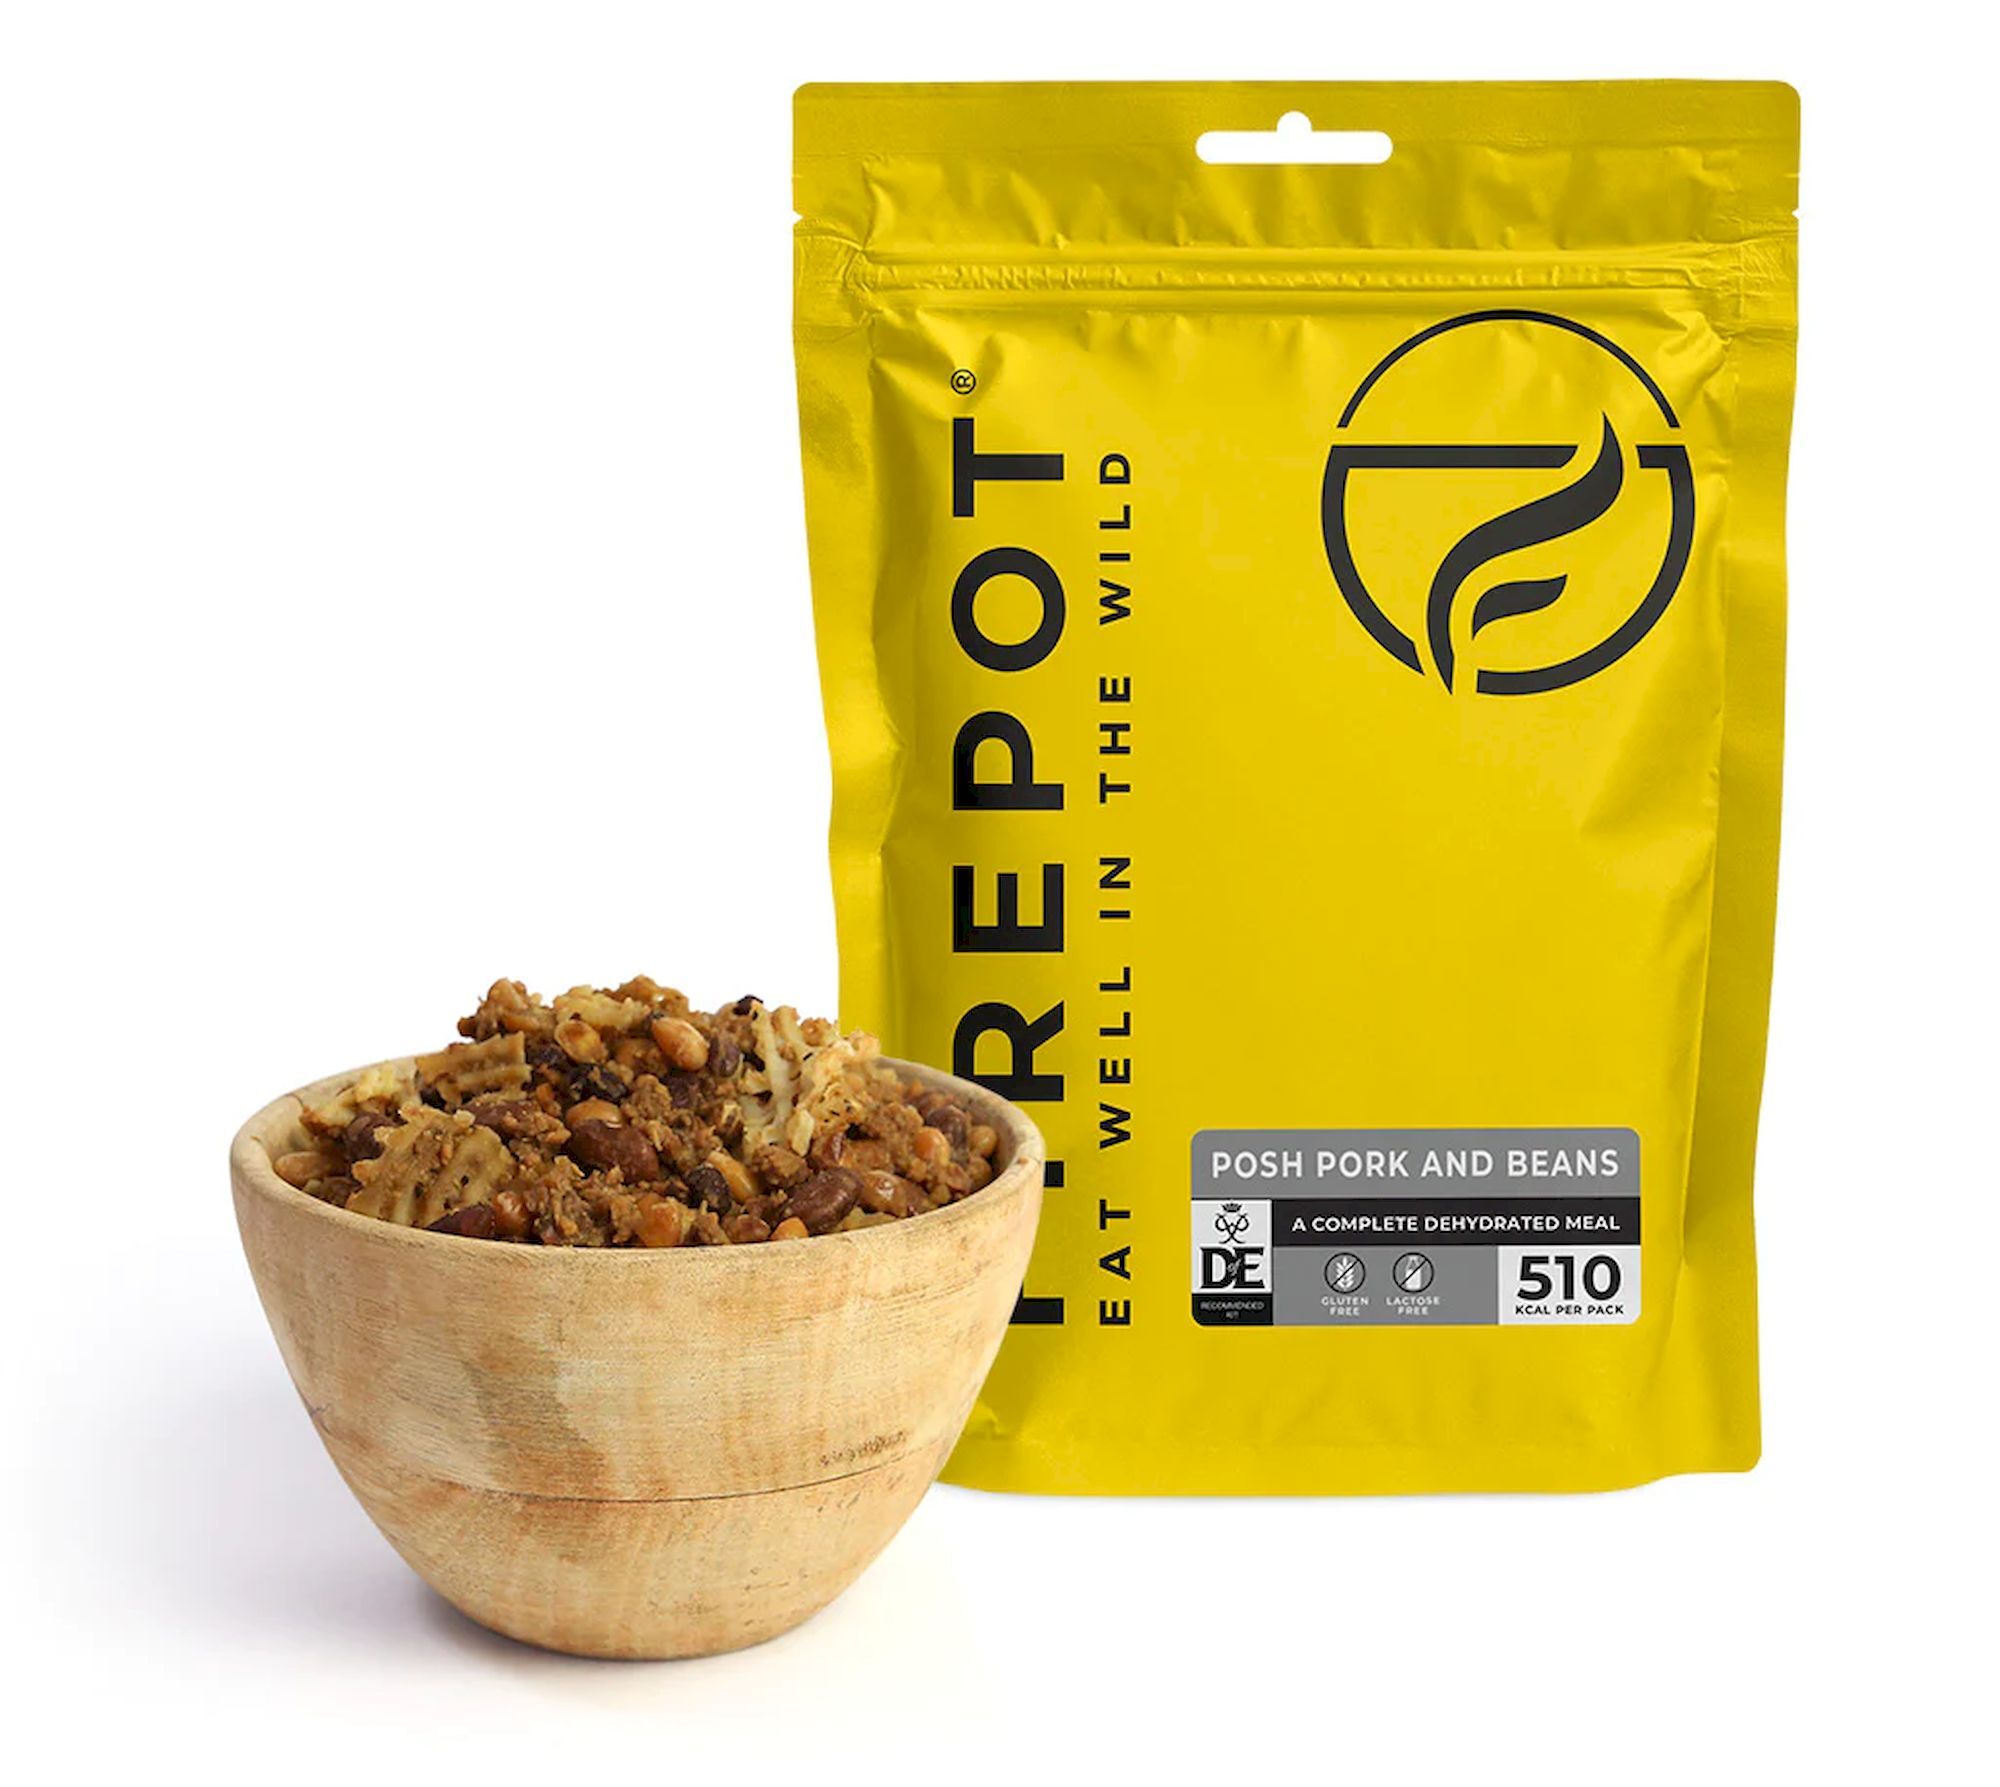 Firepot Posh Pork and Beans - Freeze-dried meals | Hardloop